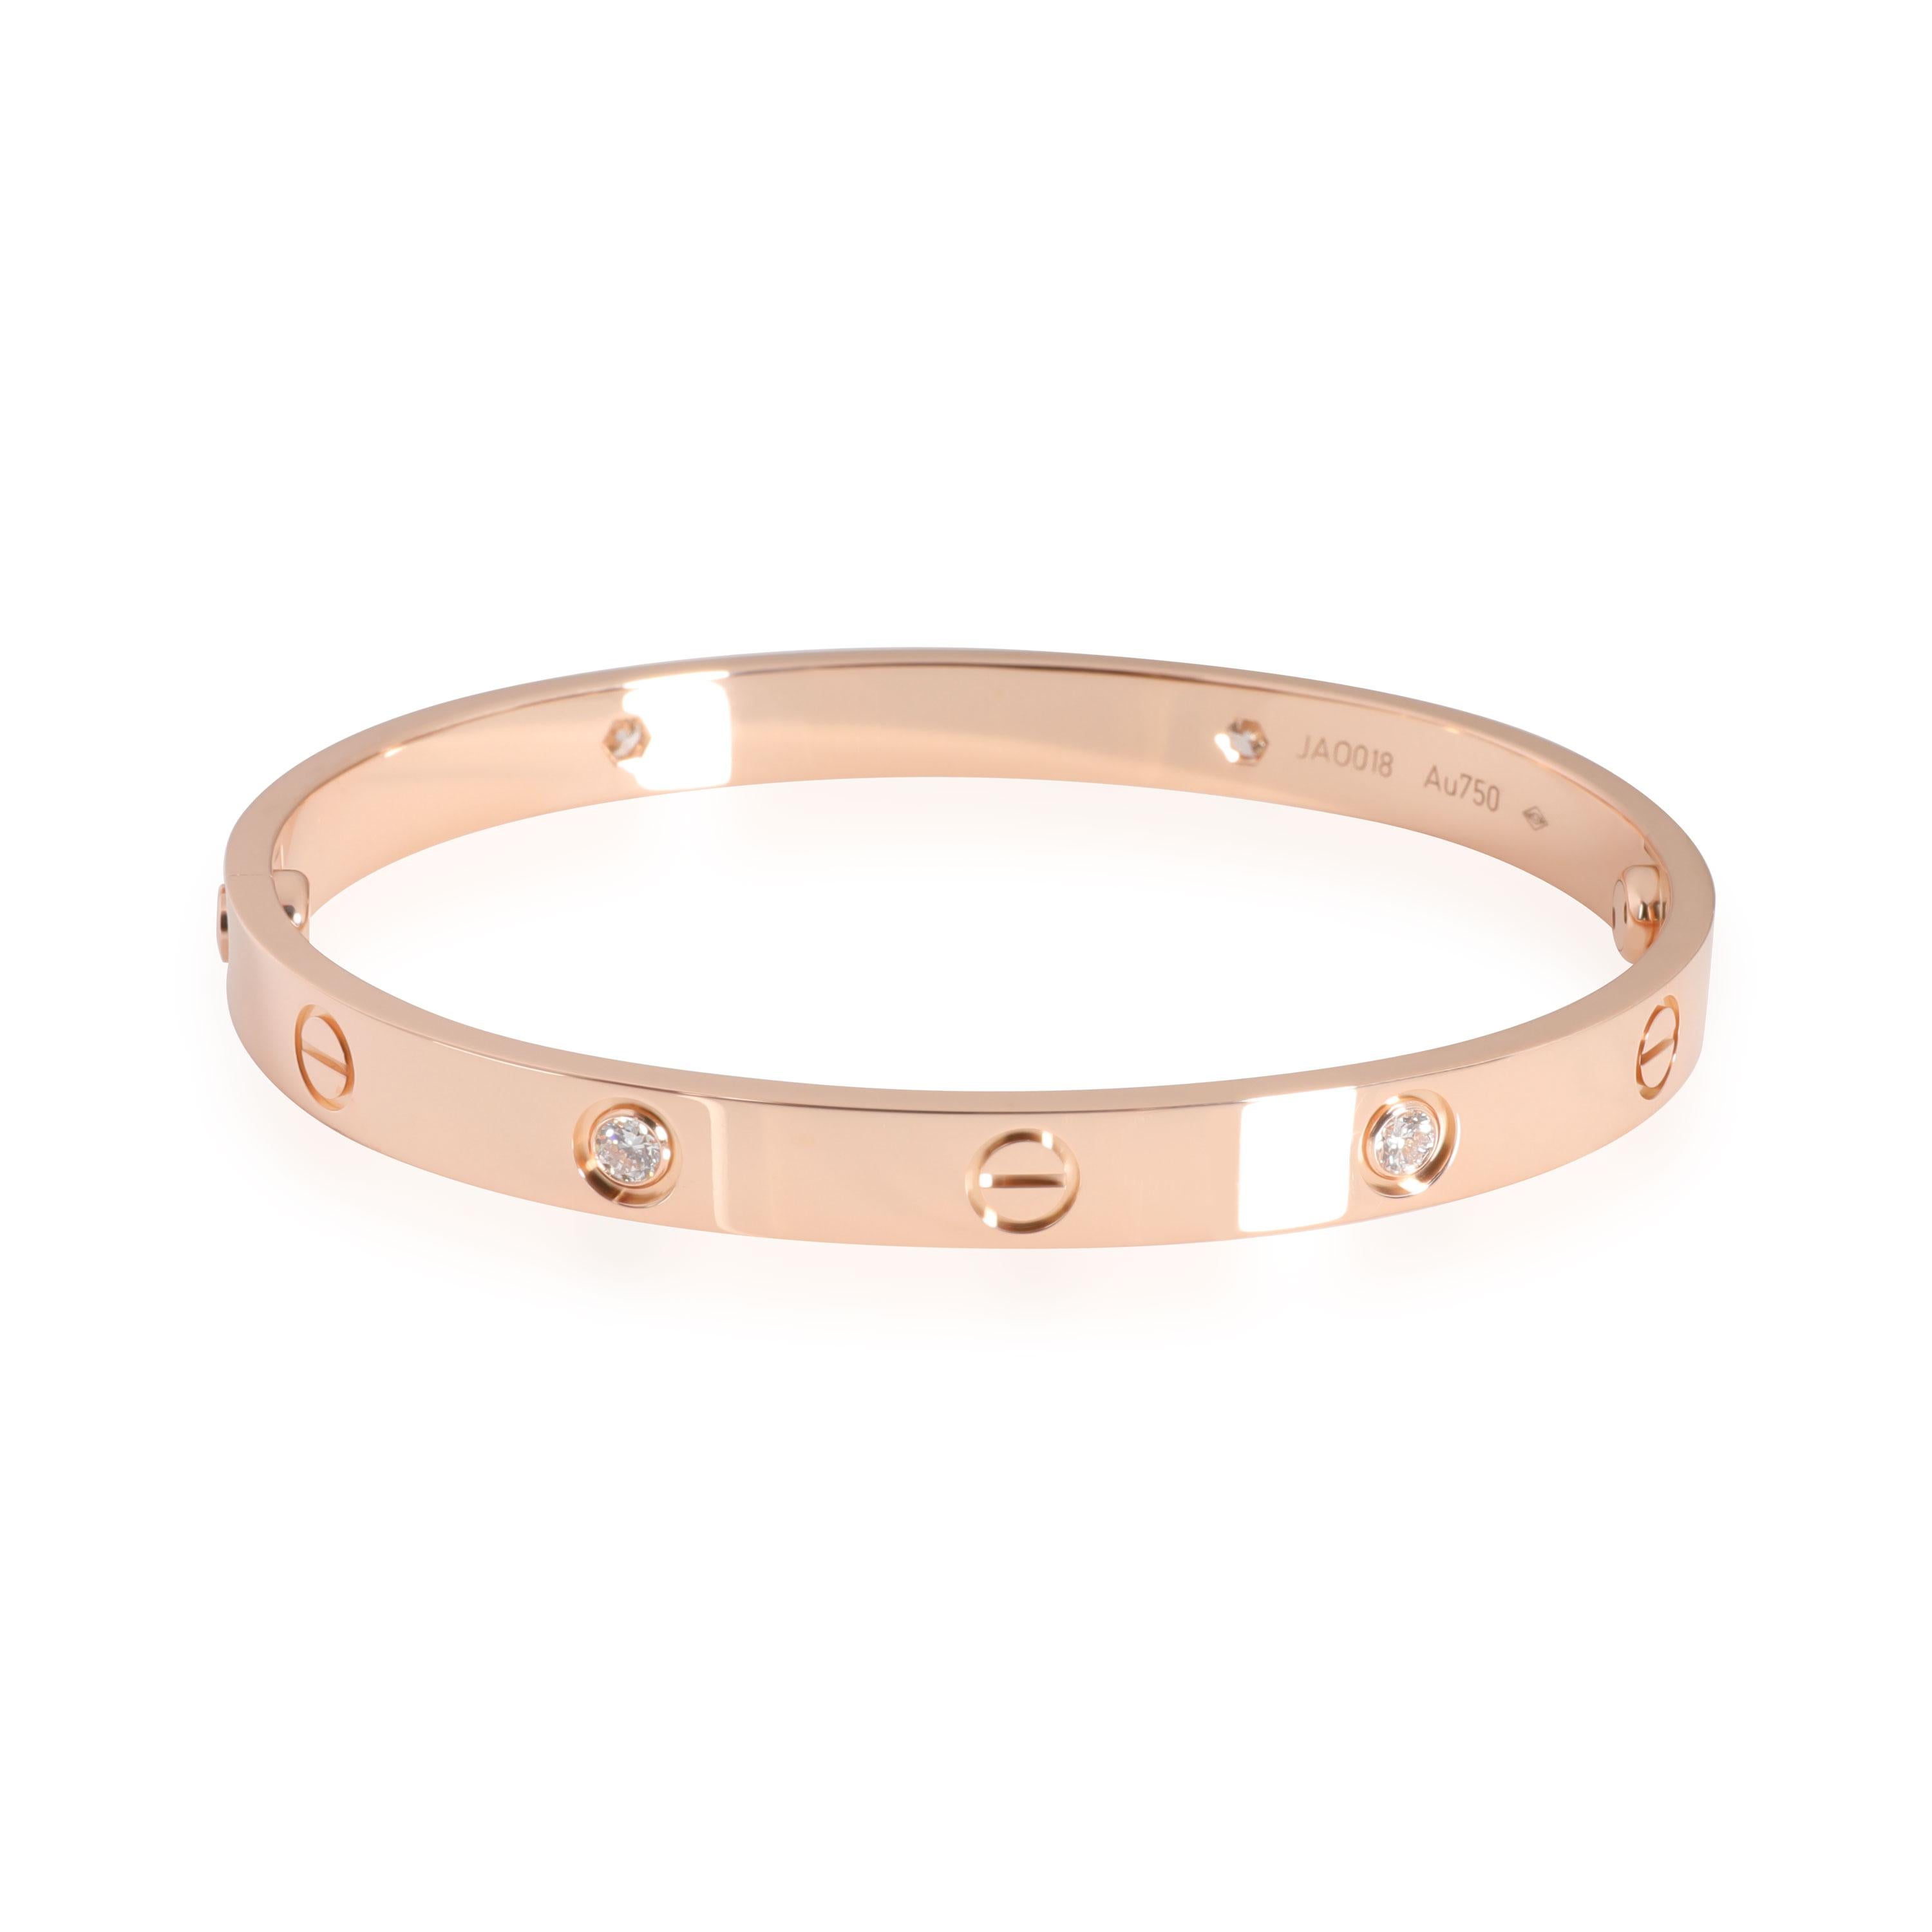 
Cartier Love Diamond Bangle in 18K Rose Gold 0.4 CTW

PRIMARY DETAILS
SKU: 111531
Listing Title: Cartier Love Diamond Bangle in 18K Rose Gold 0.4 CTW
Condition Description: Retails for 11,100 USD. In excellent condition and recently polished.